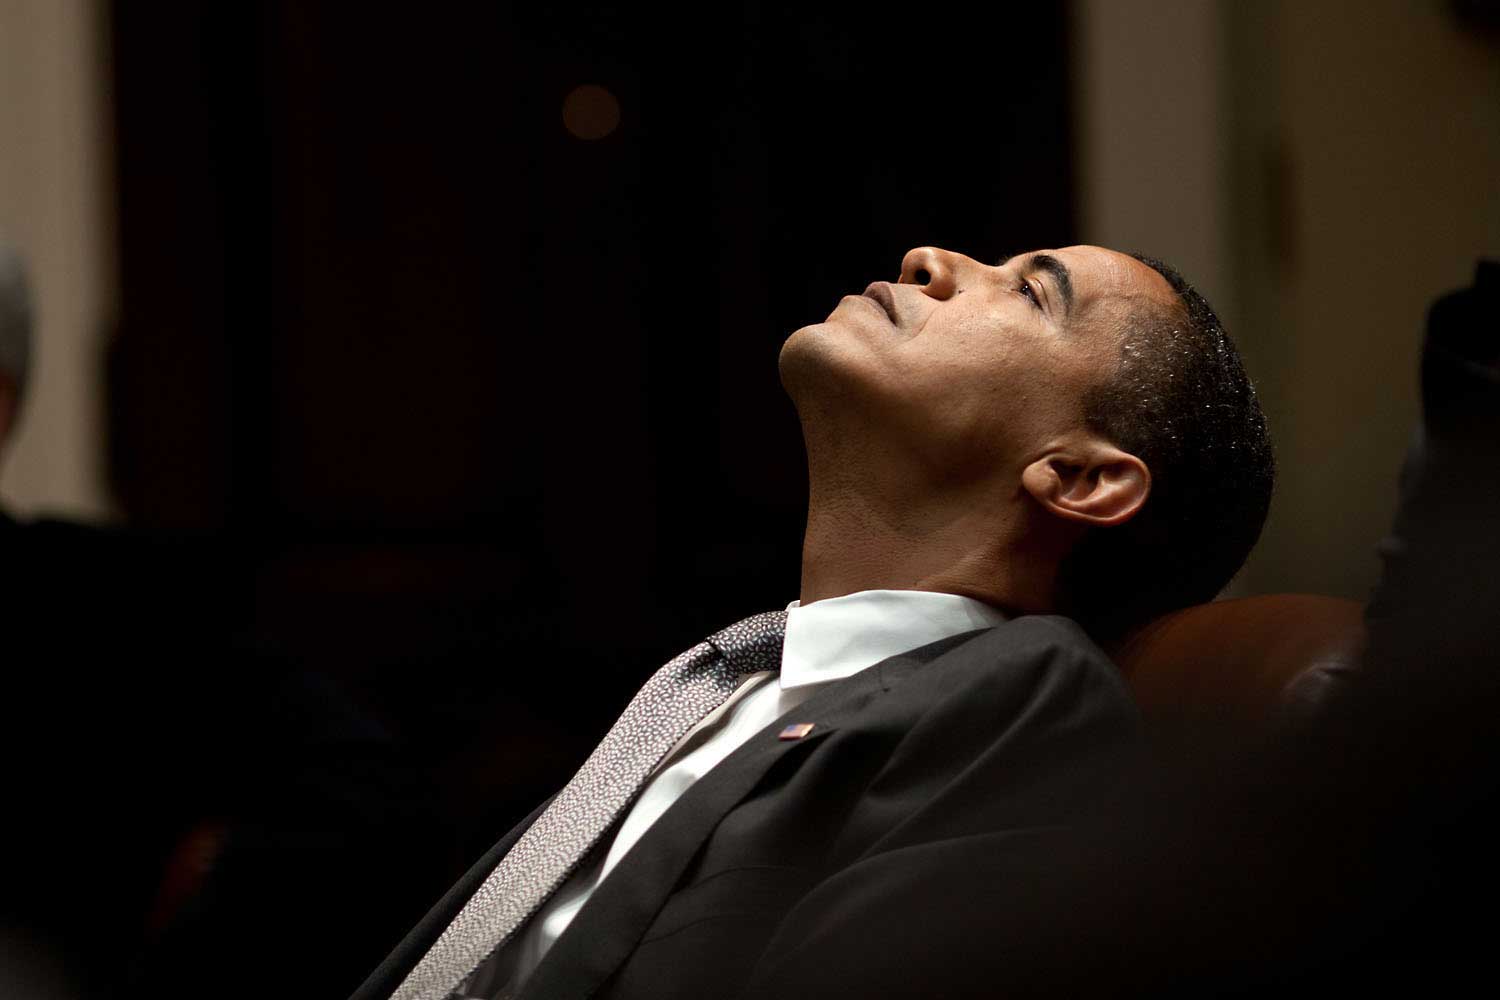 President Obama reflects during an economic meeting in the Roosevelt Room of the White House, Jan. 29, 2009.